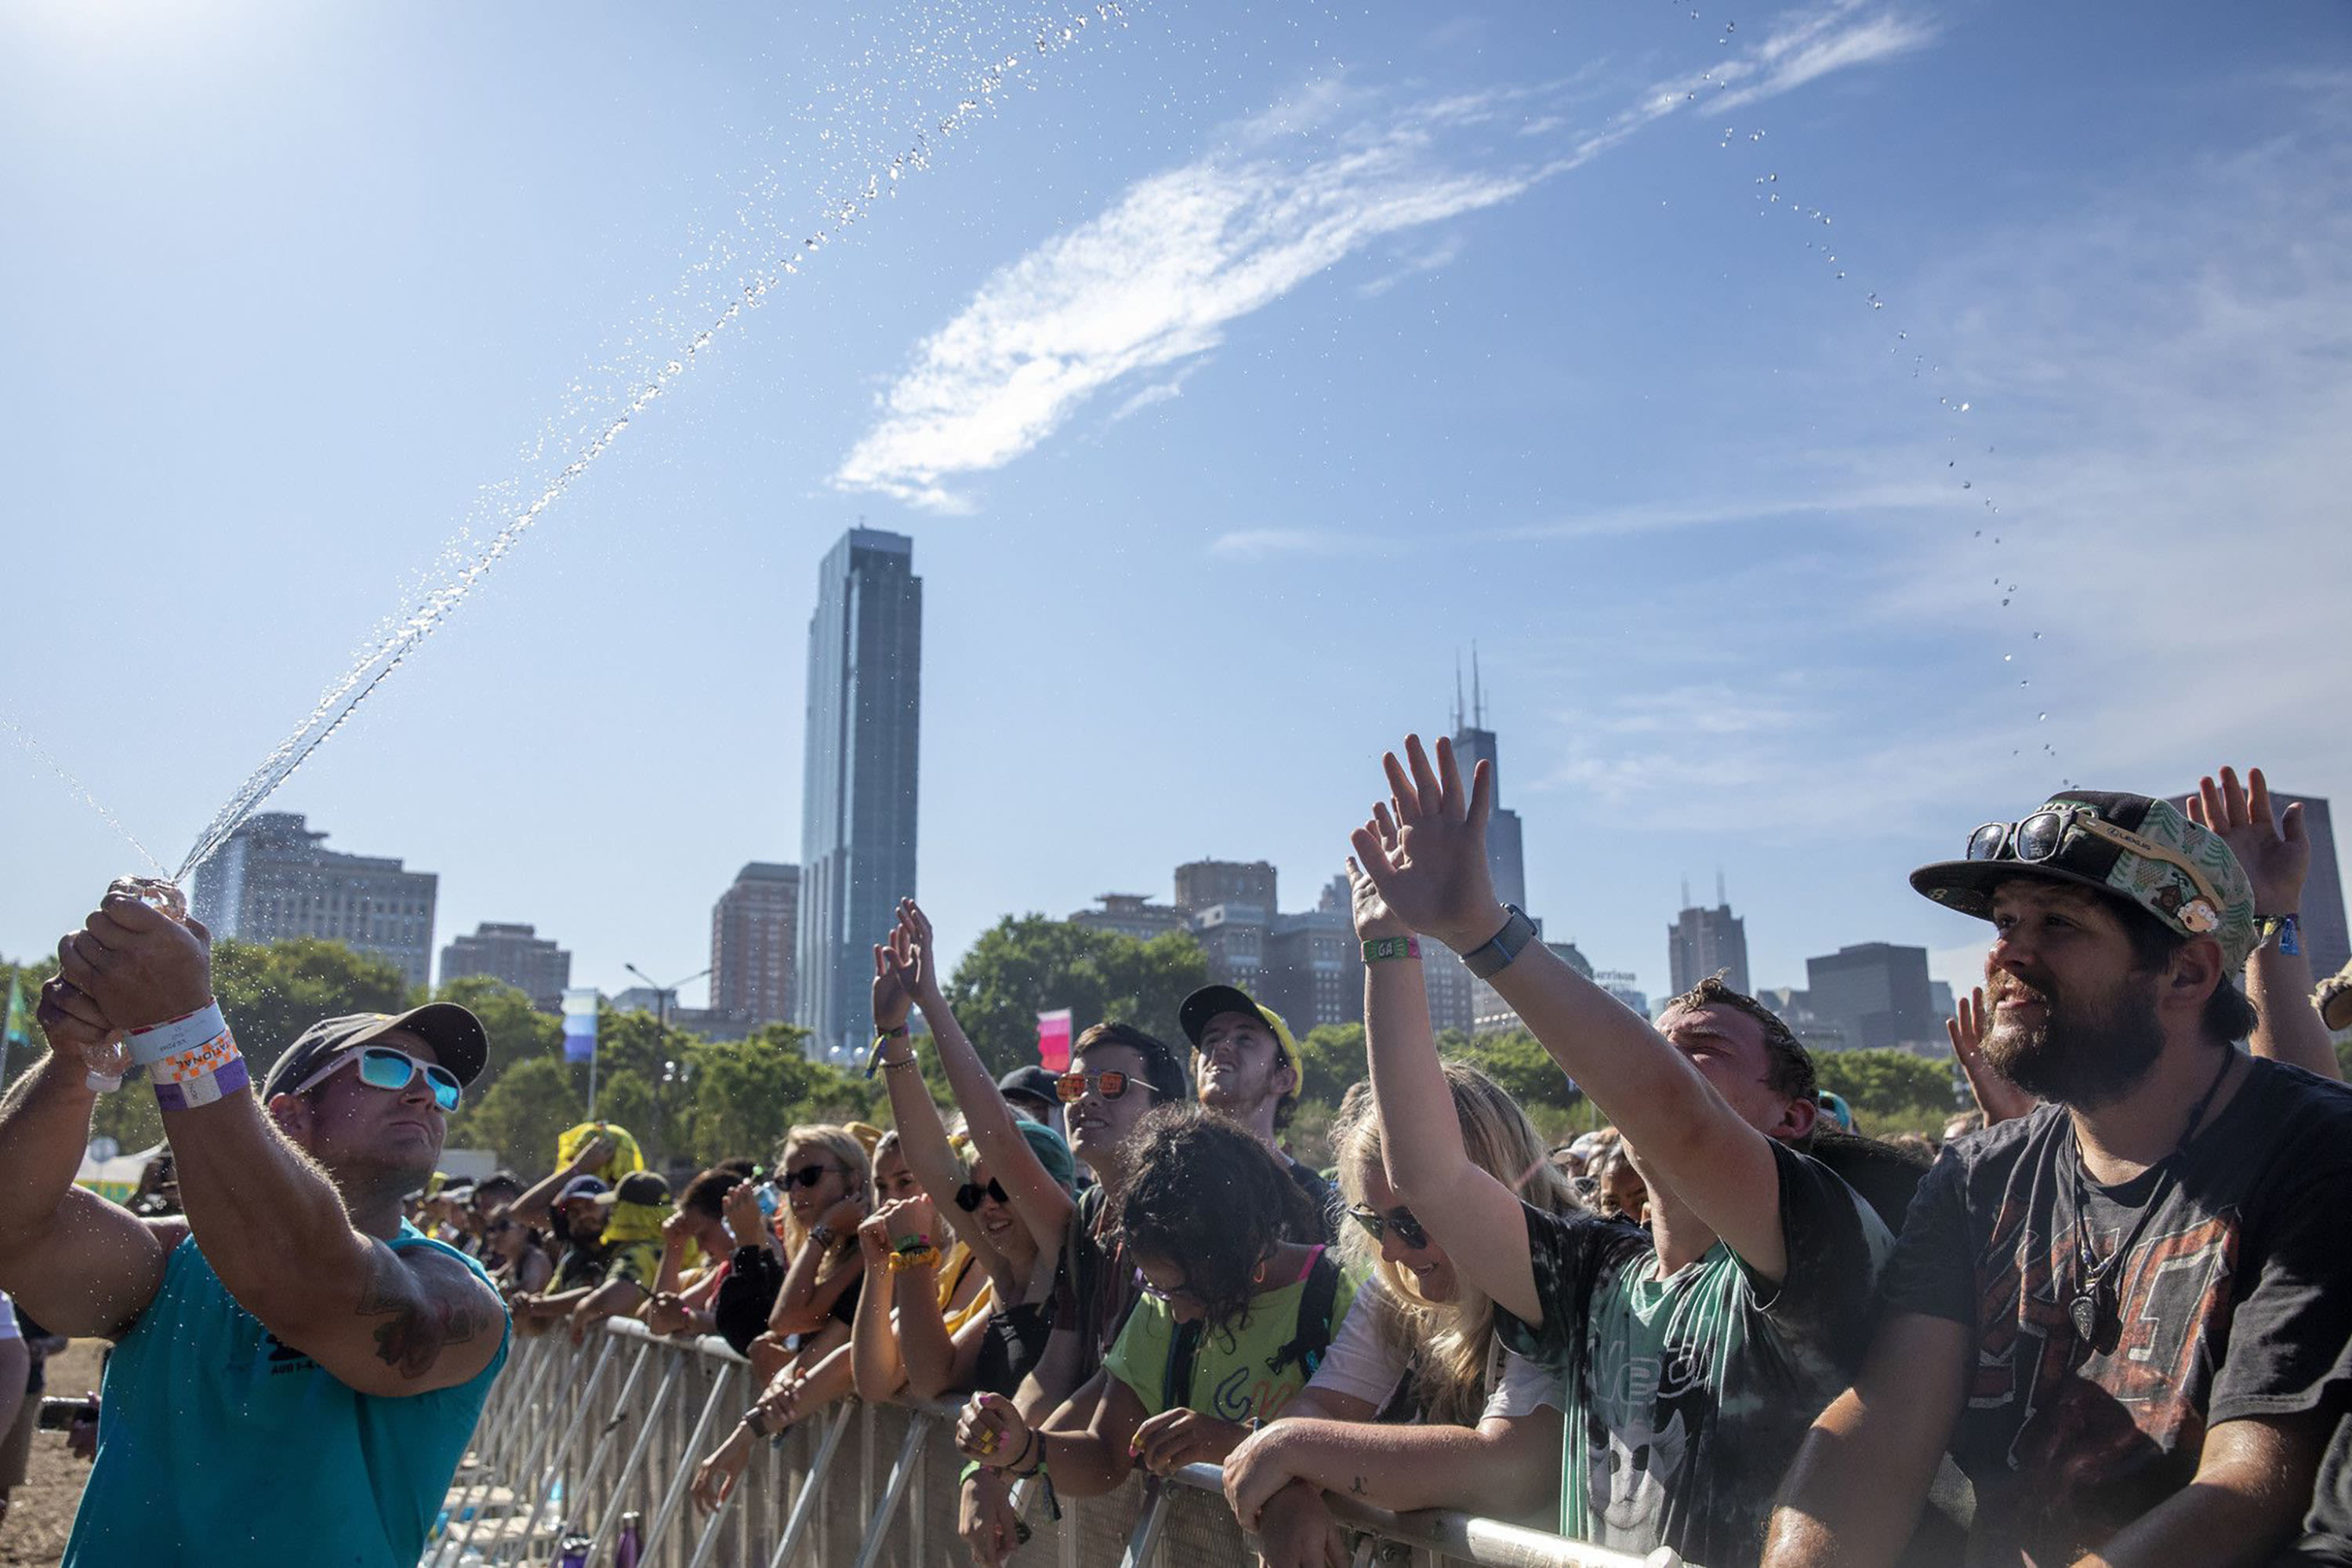 With storms and heat forecast for Lollapalooza, music festivals consider how to adapt to climate change